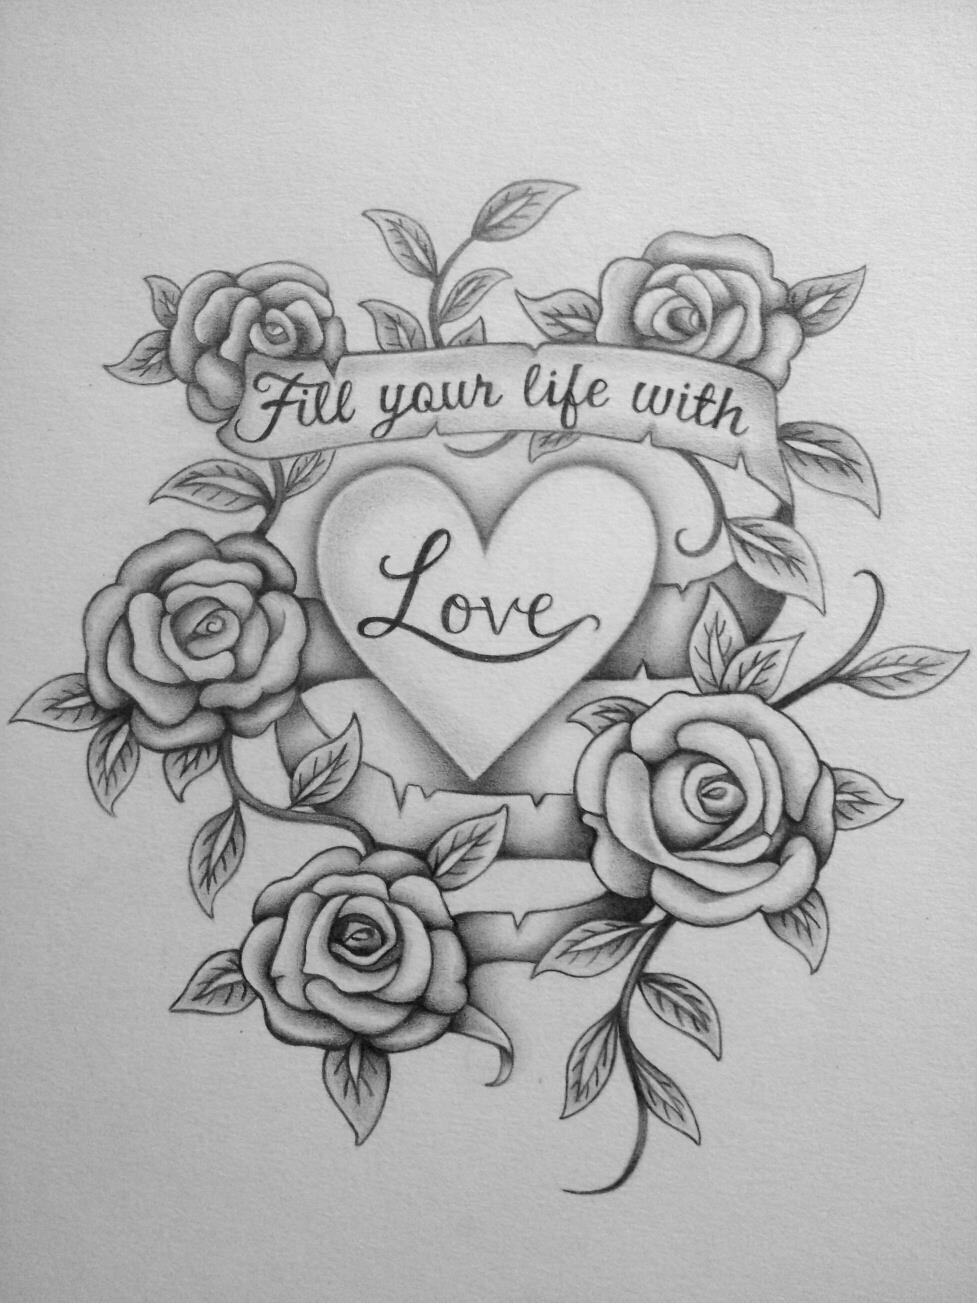 Pencil Sketches Of Hearts And Roses Cliparts.co